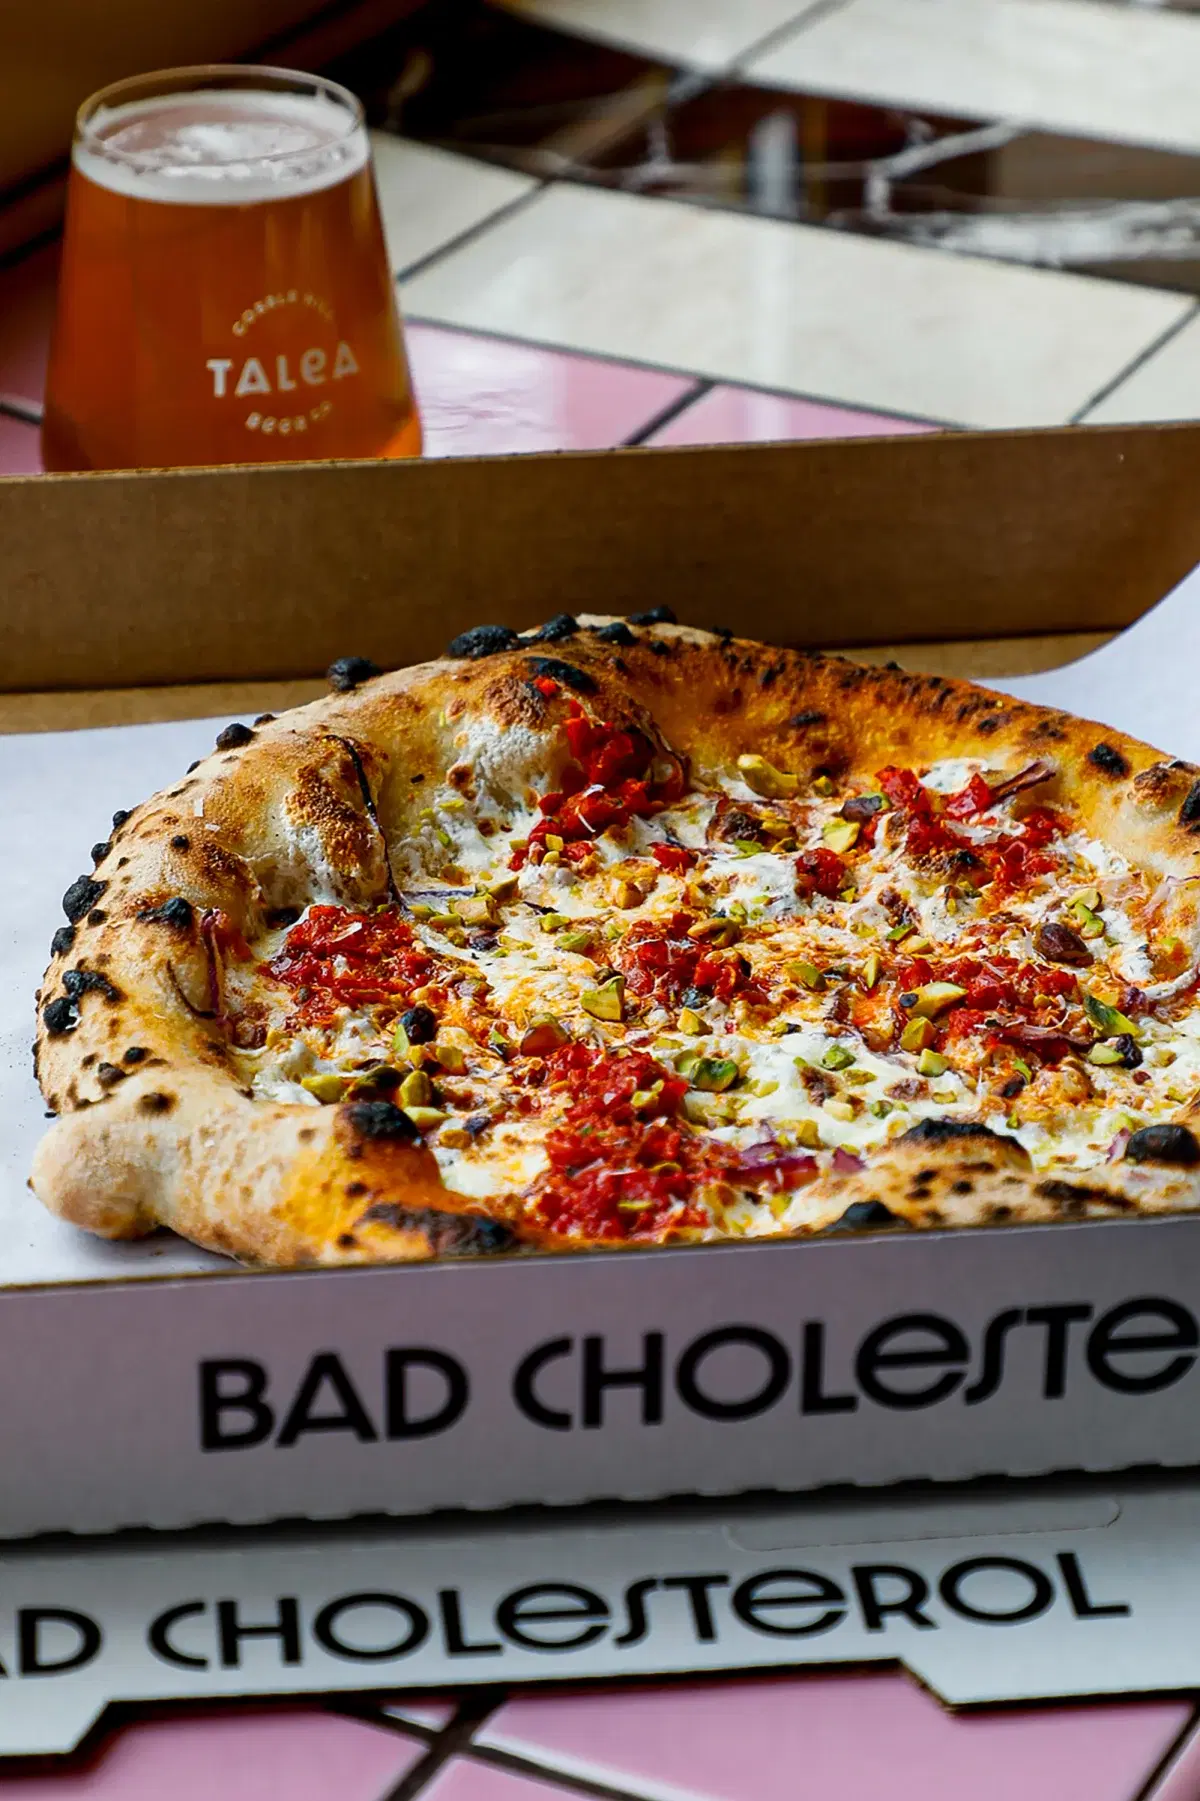 A pizza from Bad Cholesterol and a Talea beer